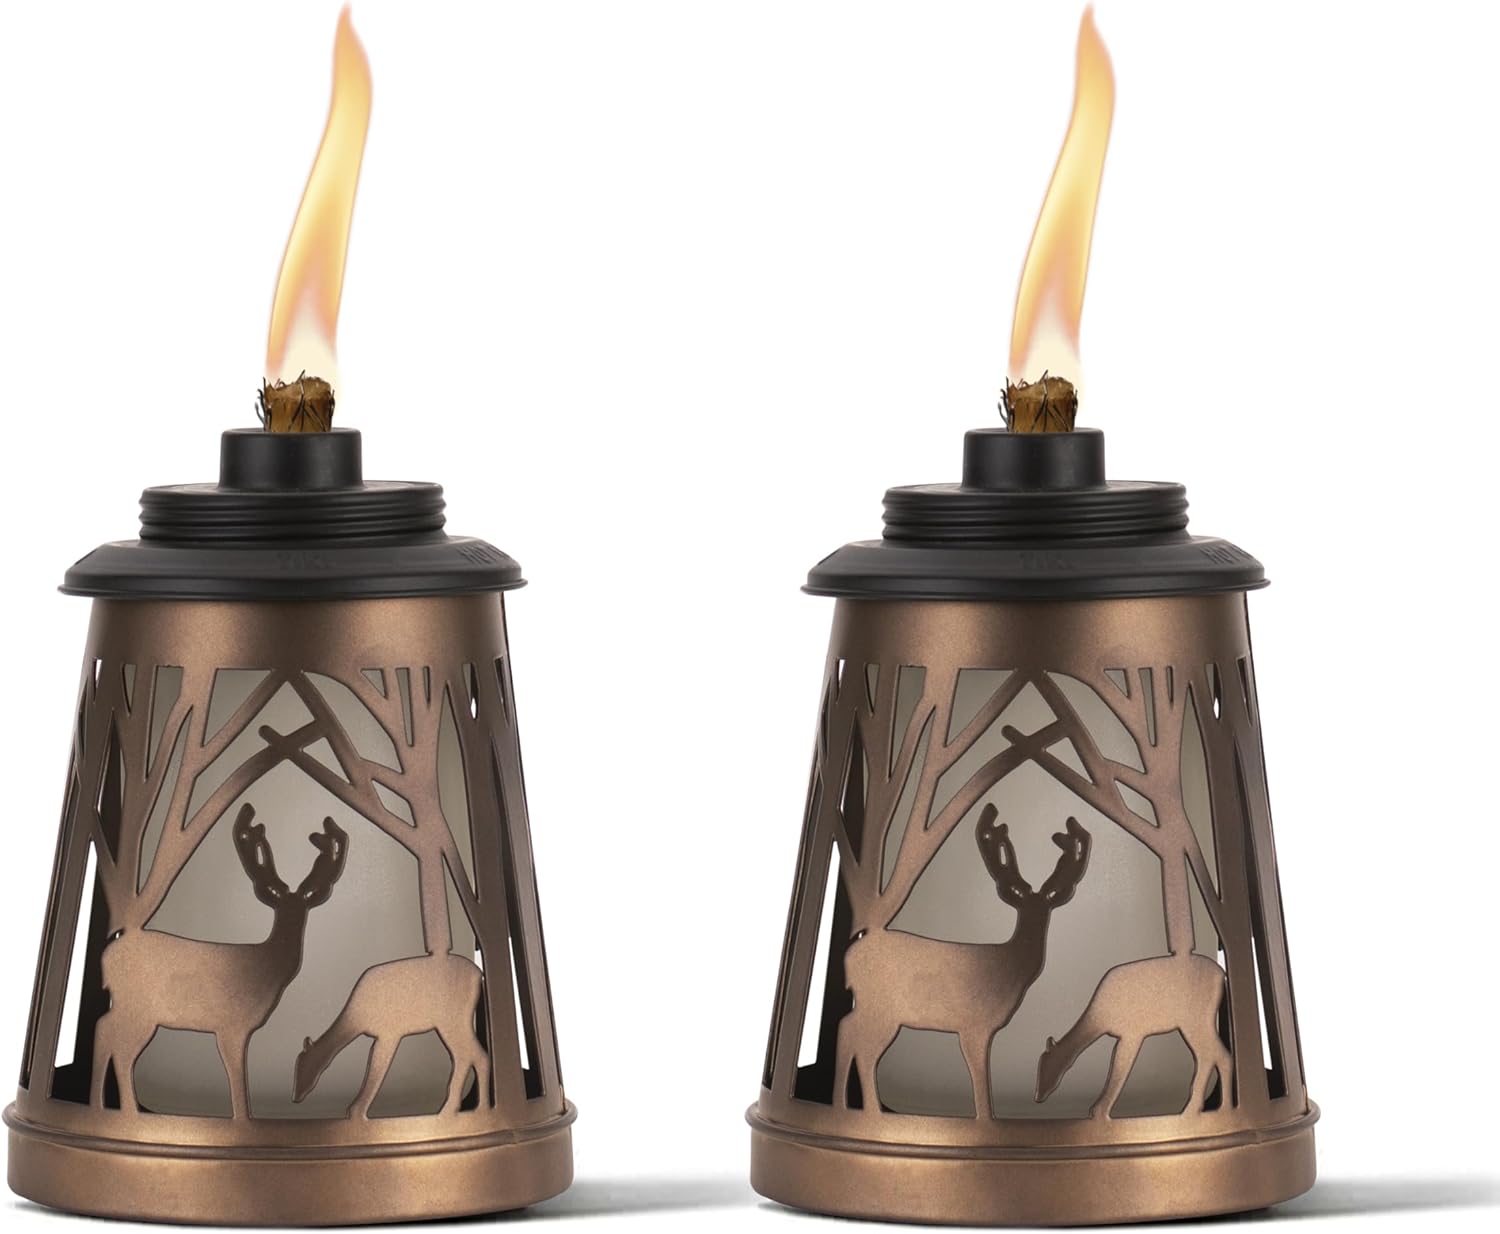 TIKI Brand Woodsy Table Torch 2-Pack, Tiki Patio, Tiki Table Torch, Backyard, and Lawn, Cabin Dcor, Up North, Outdoor Table, Bronze, 1123118